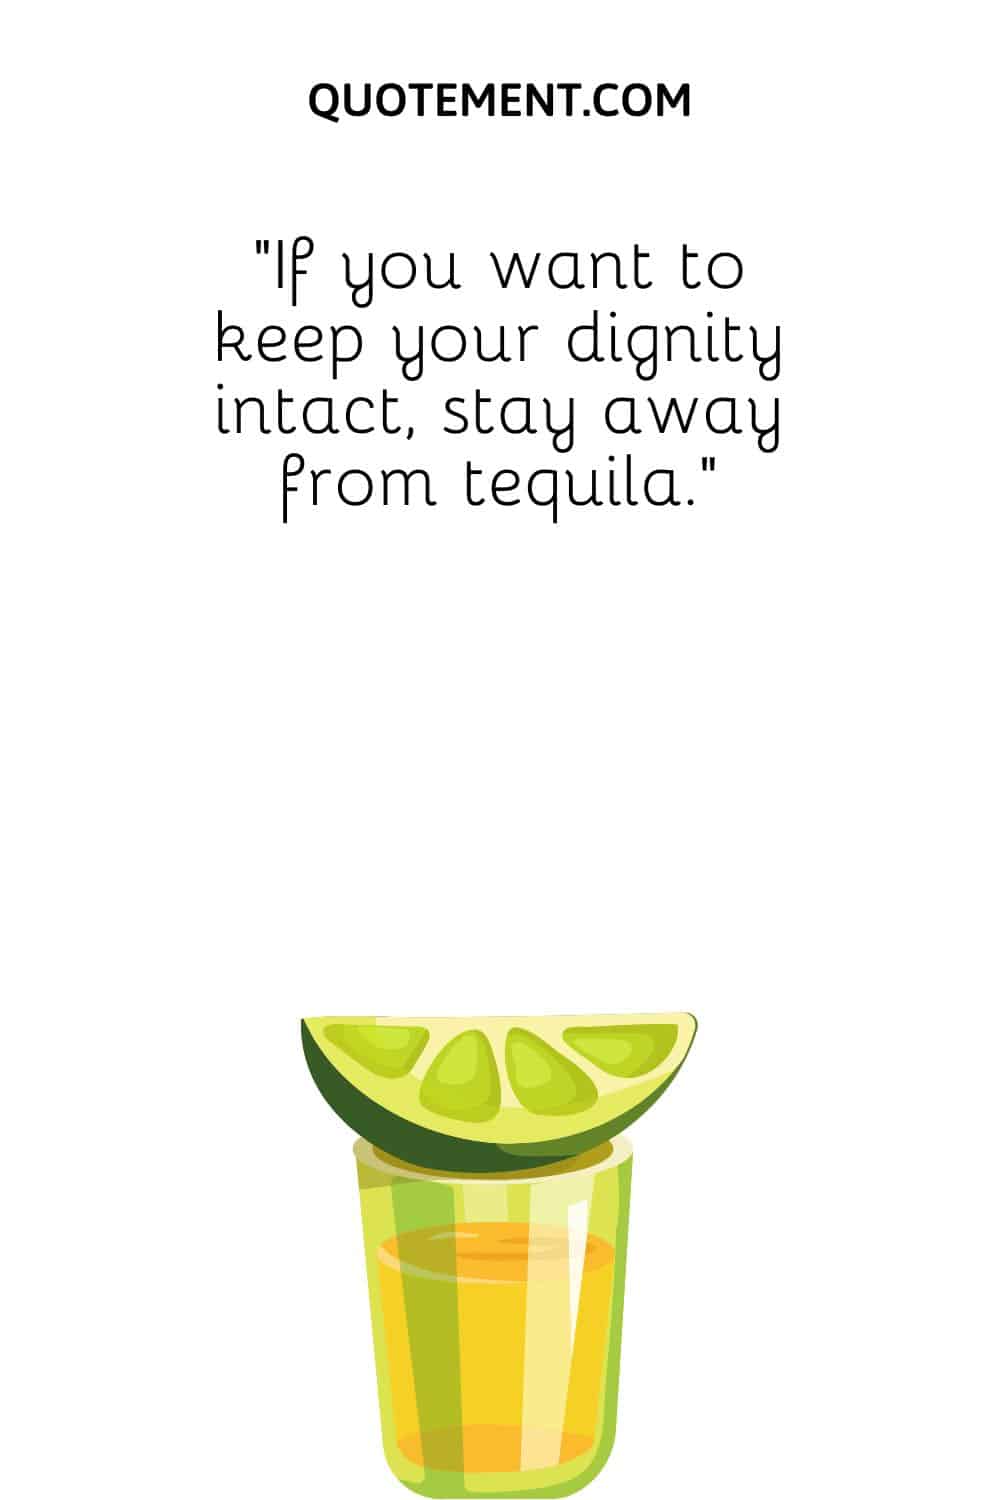 If you want to keep your dignity intact, stay away from tequila.